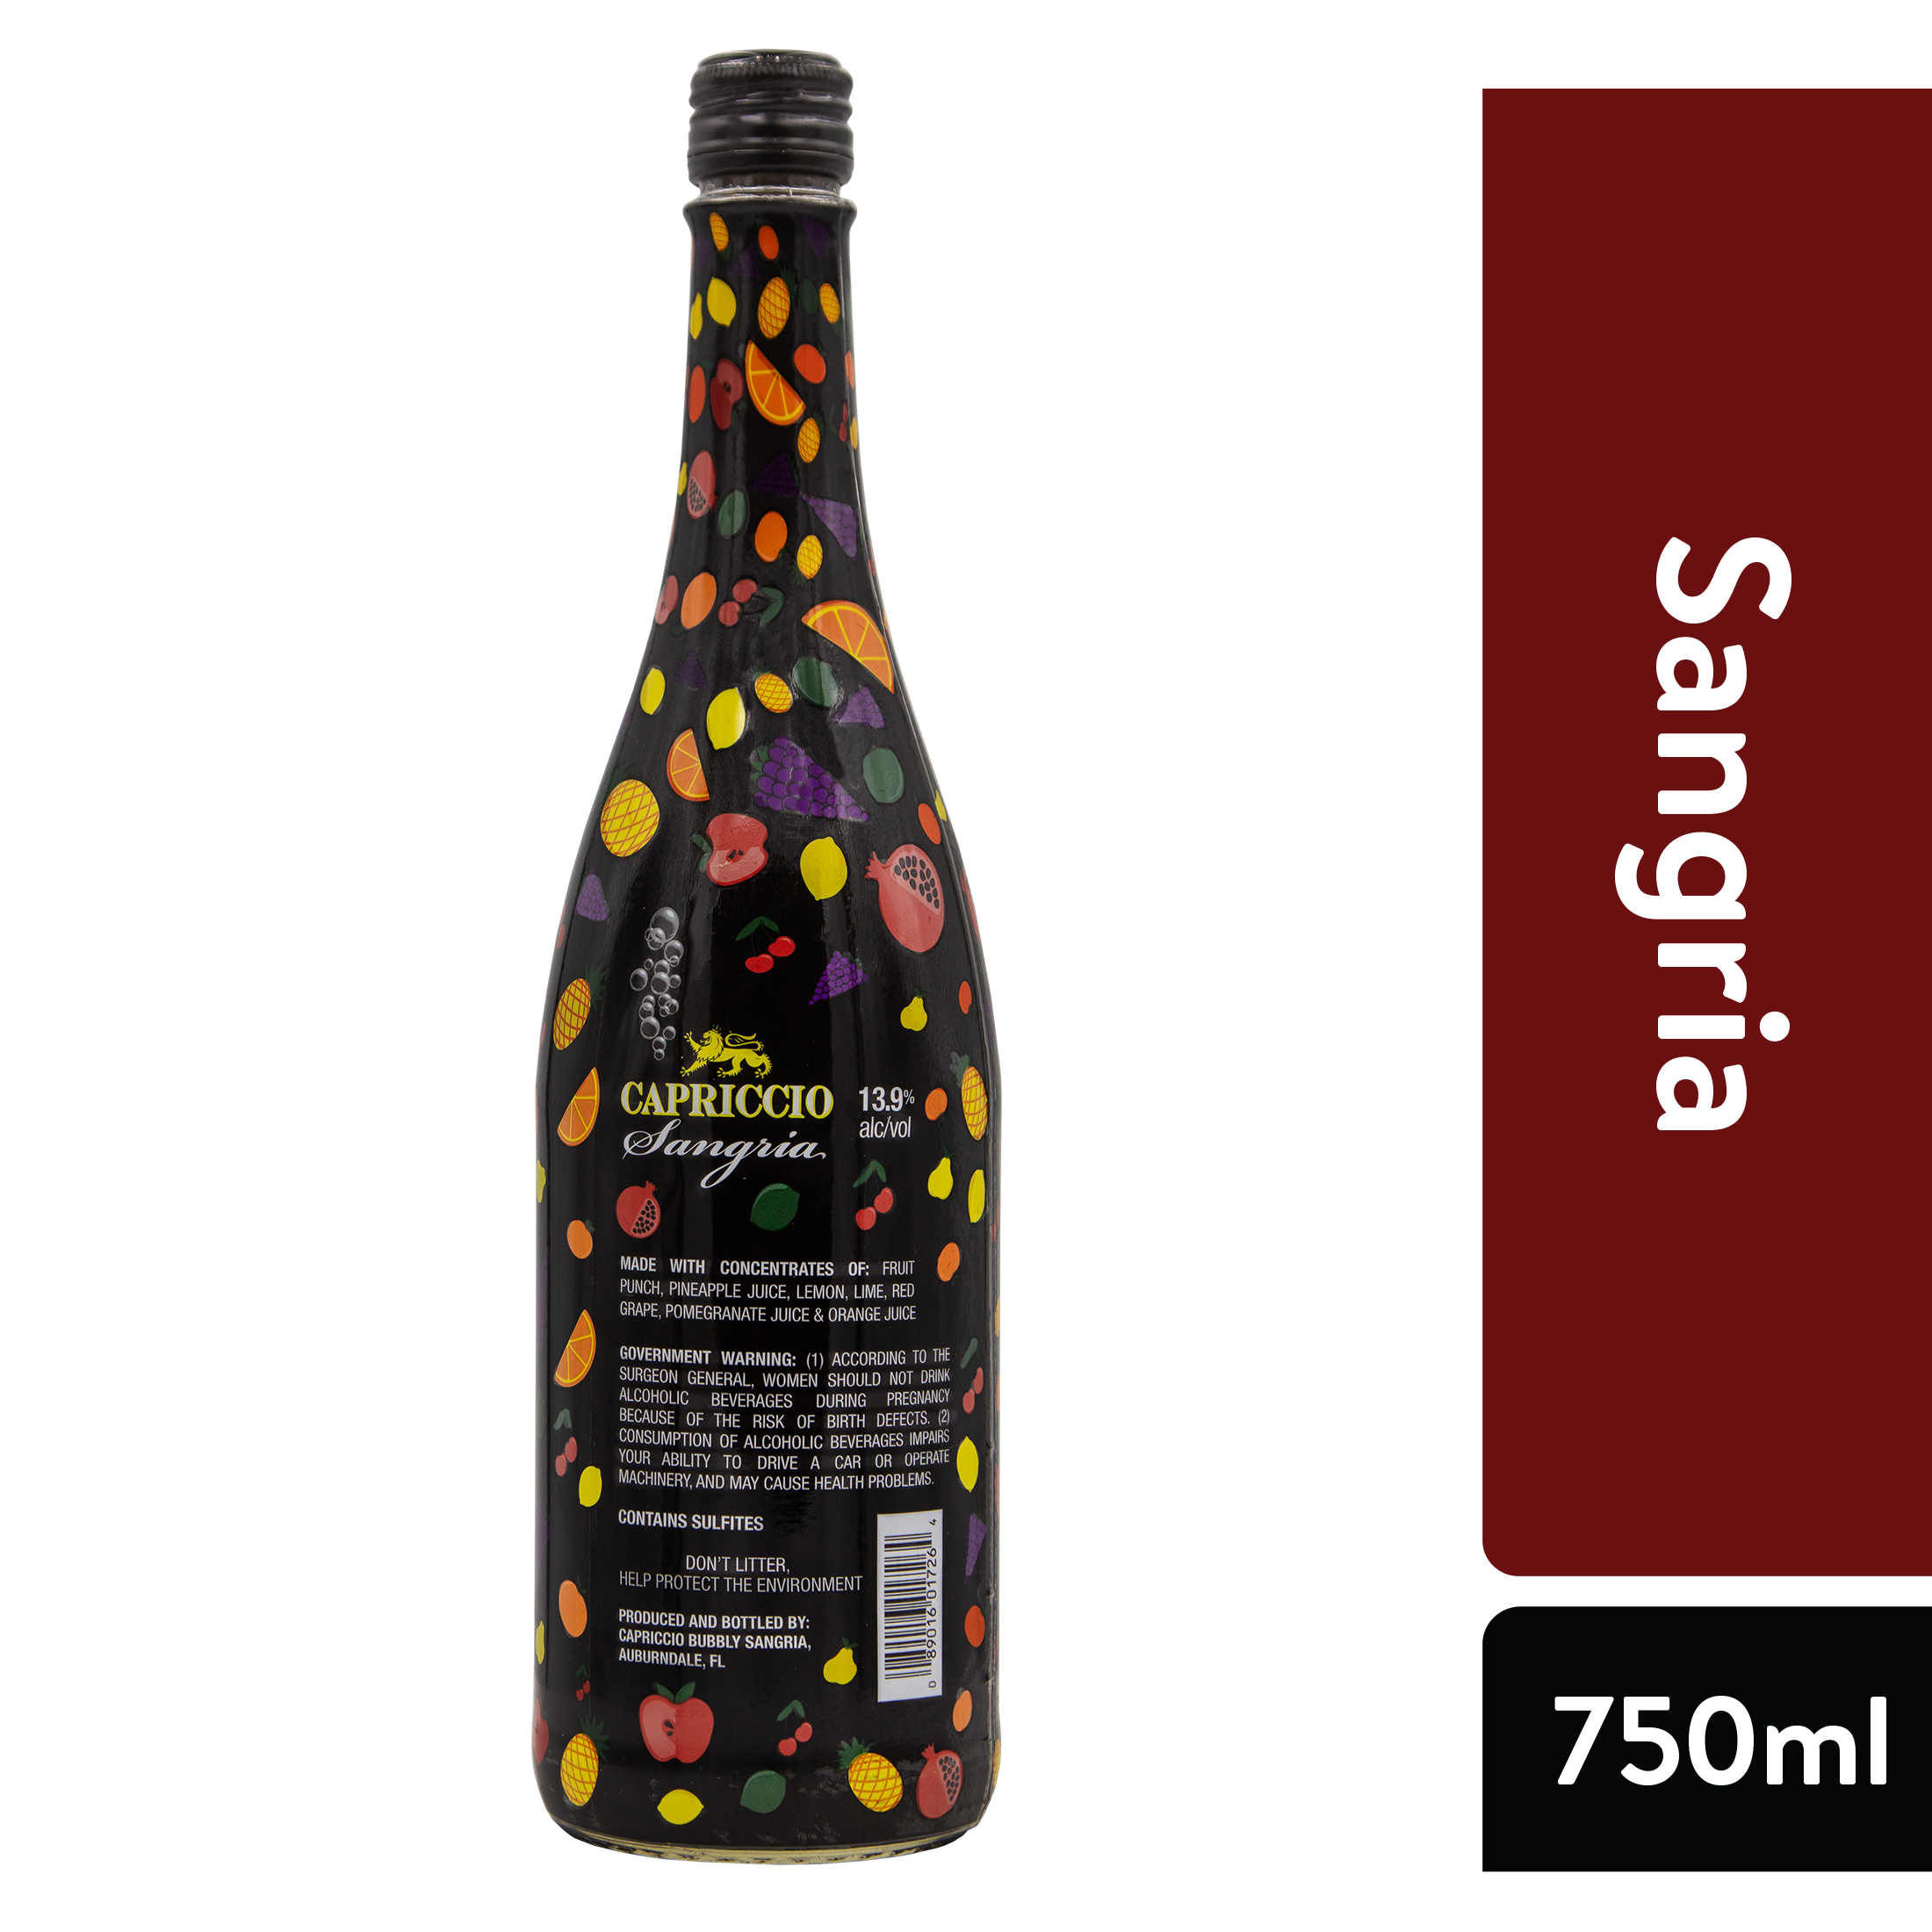 Capriccio Red Sangria Wine, Florida, 13.9% ABV, 750 ml Glass Bottle, 5-150ml Servings - image 2 of 5